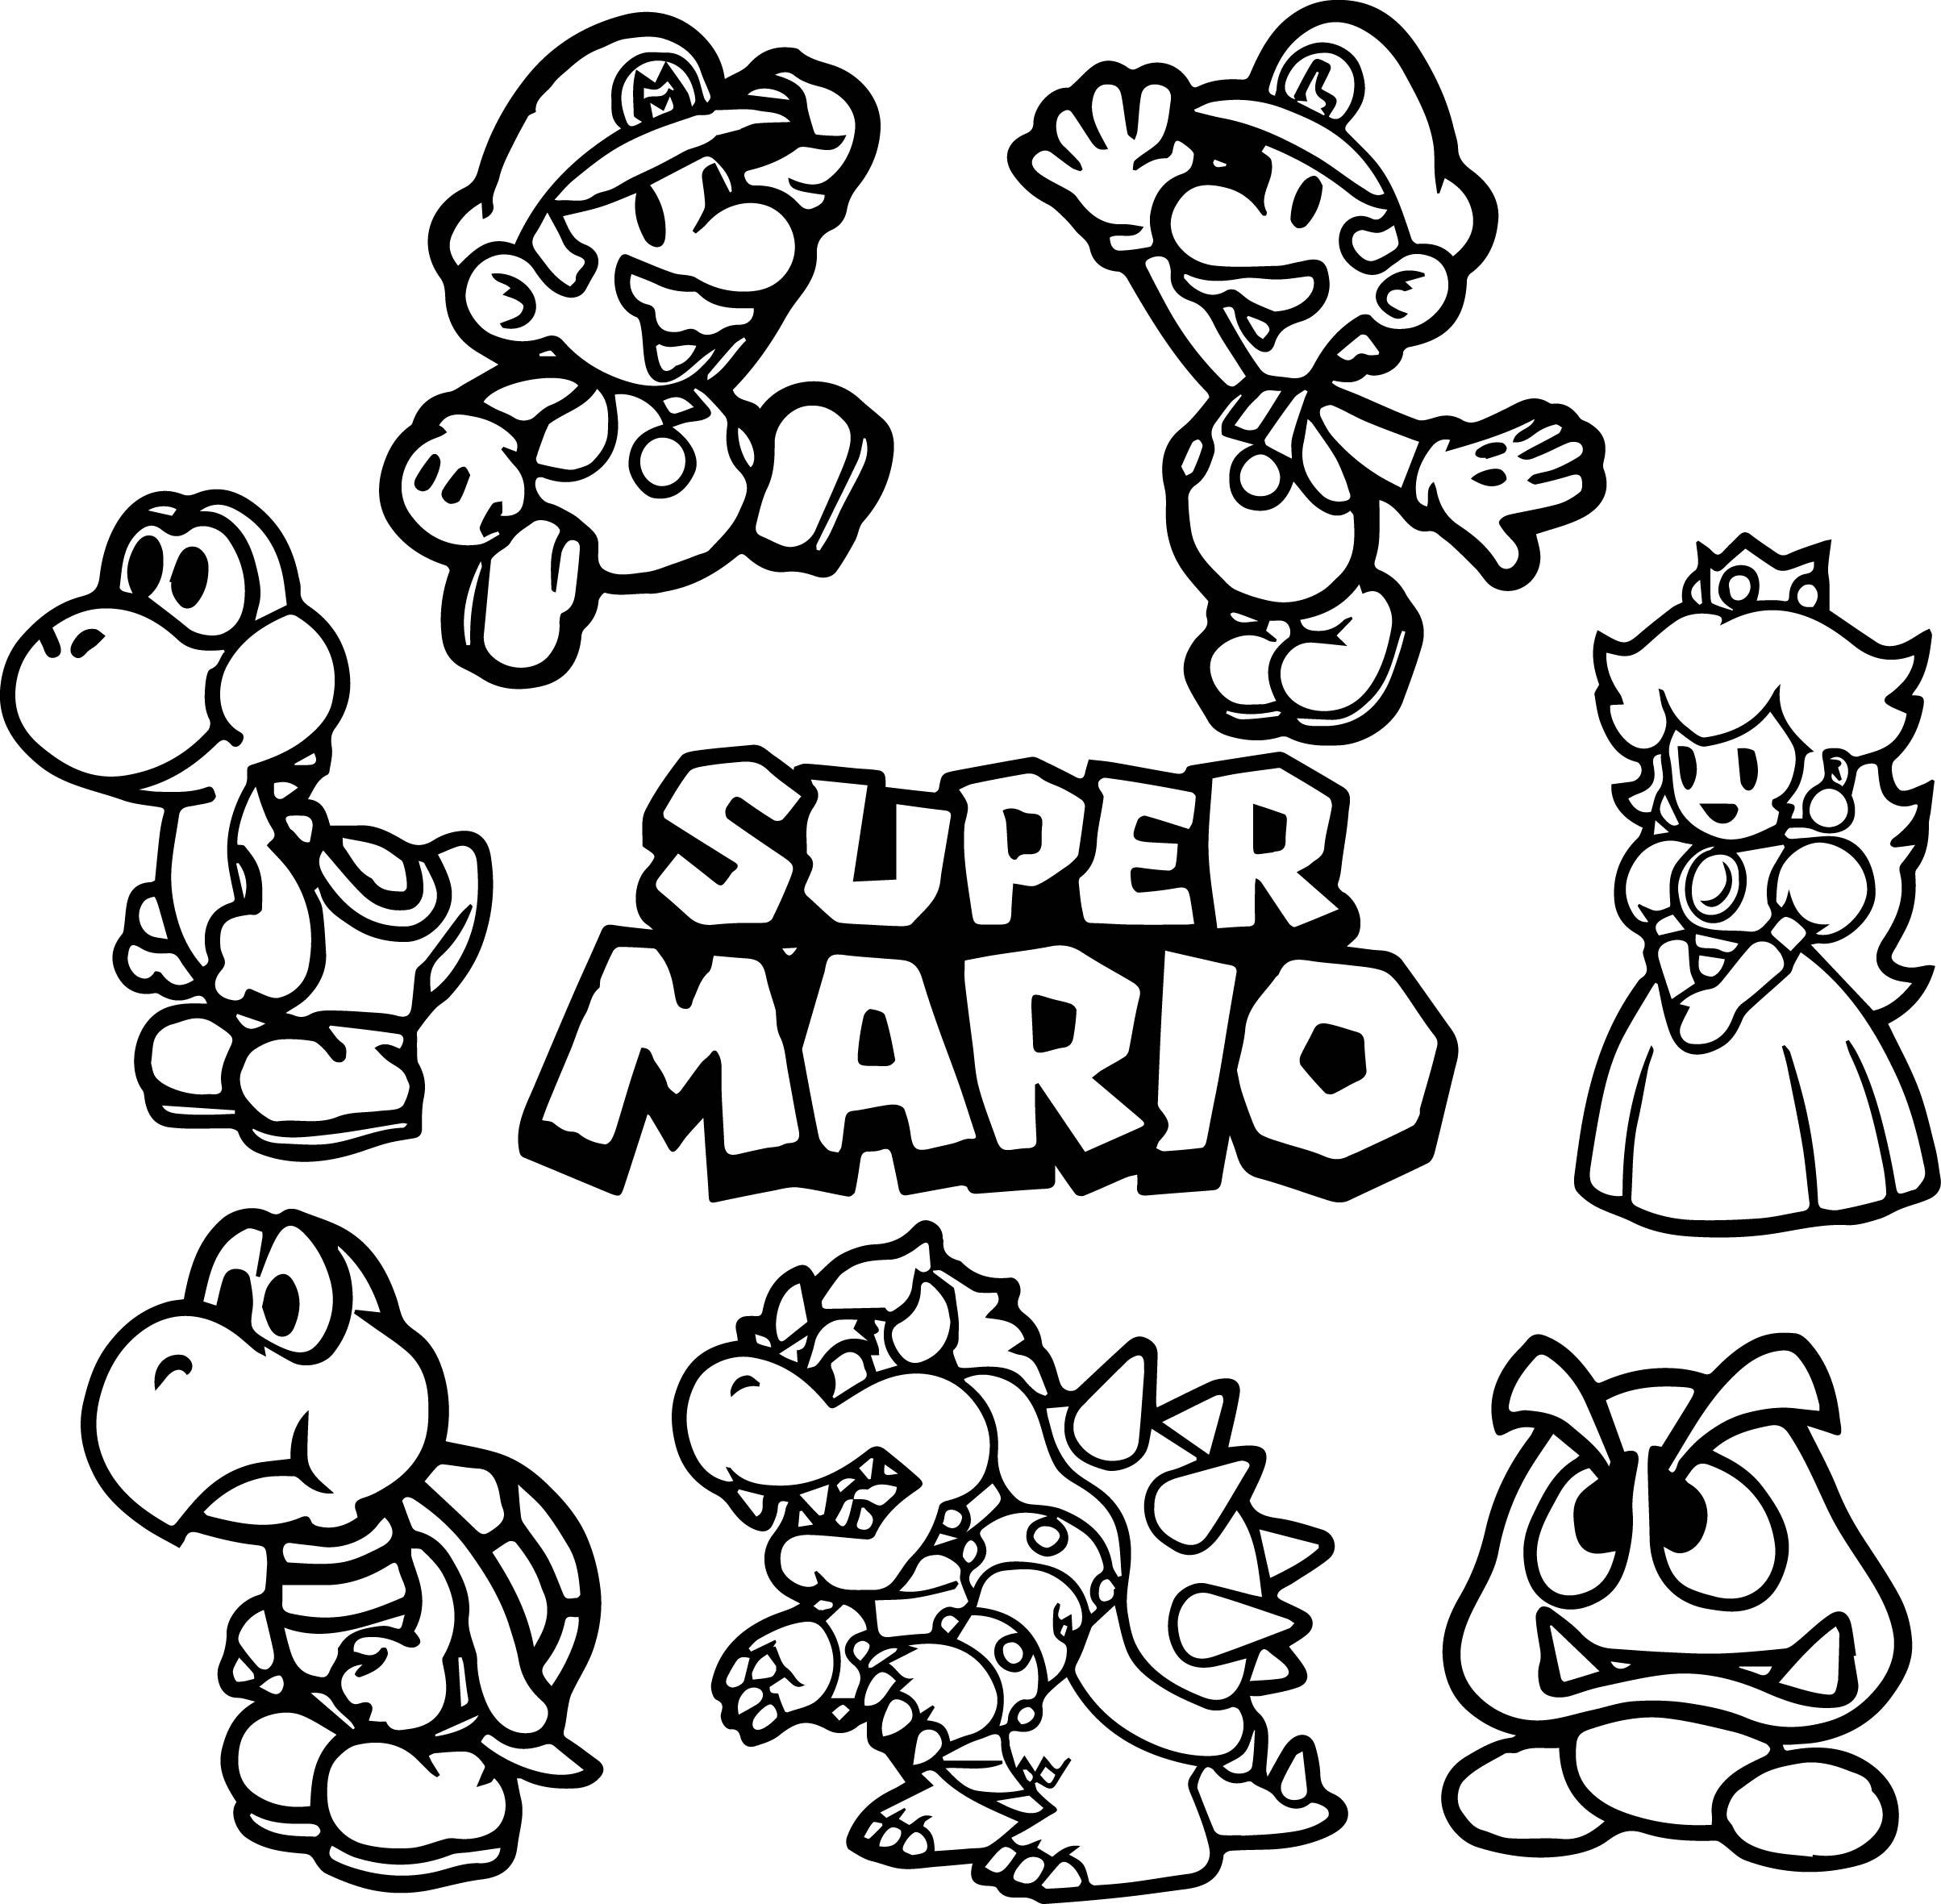 Cat Mario Coloring Pages at GetColorings.com | Free printable colorings